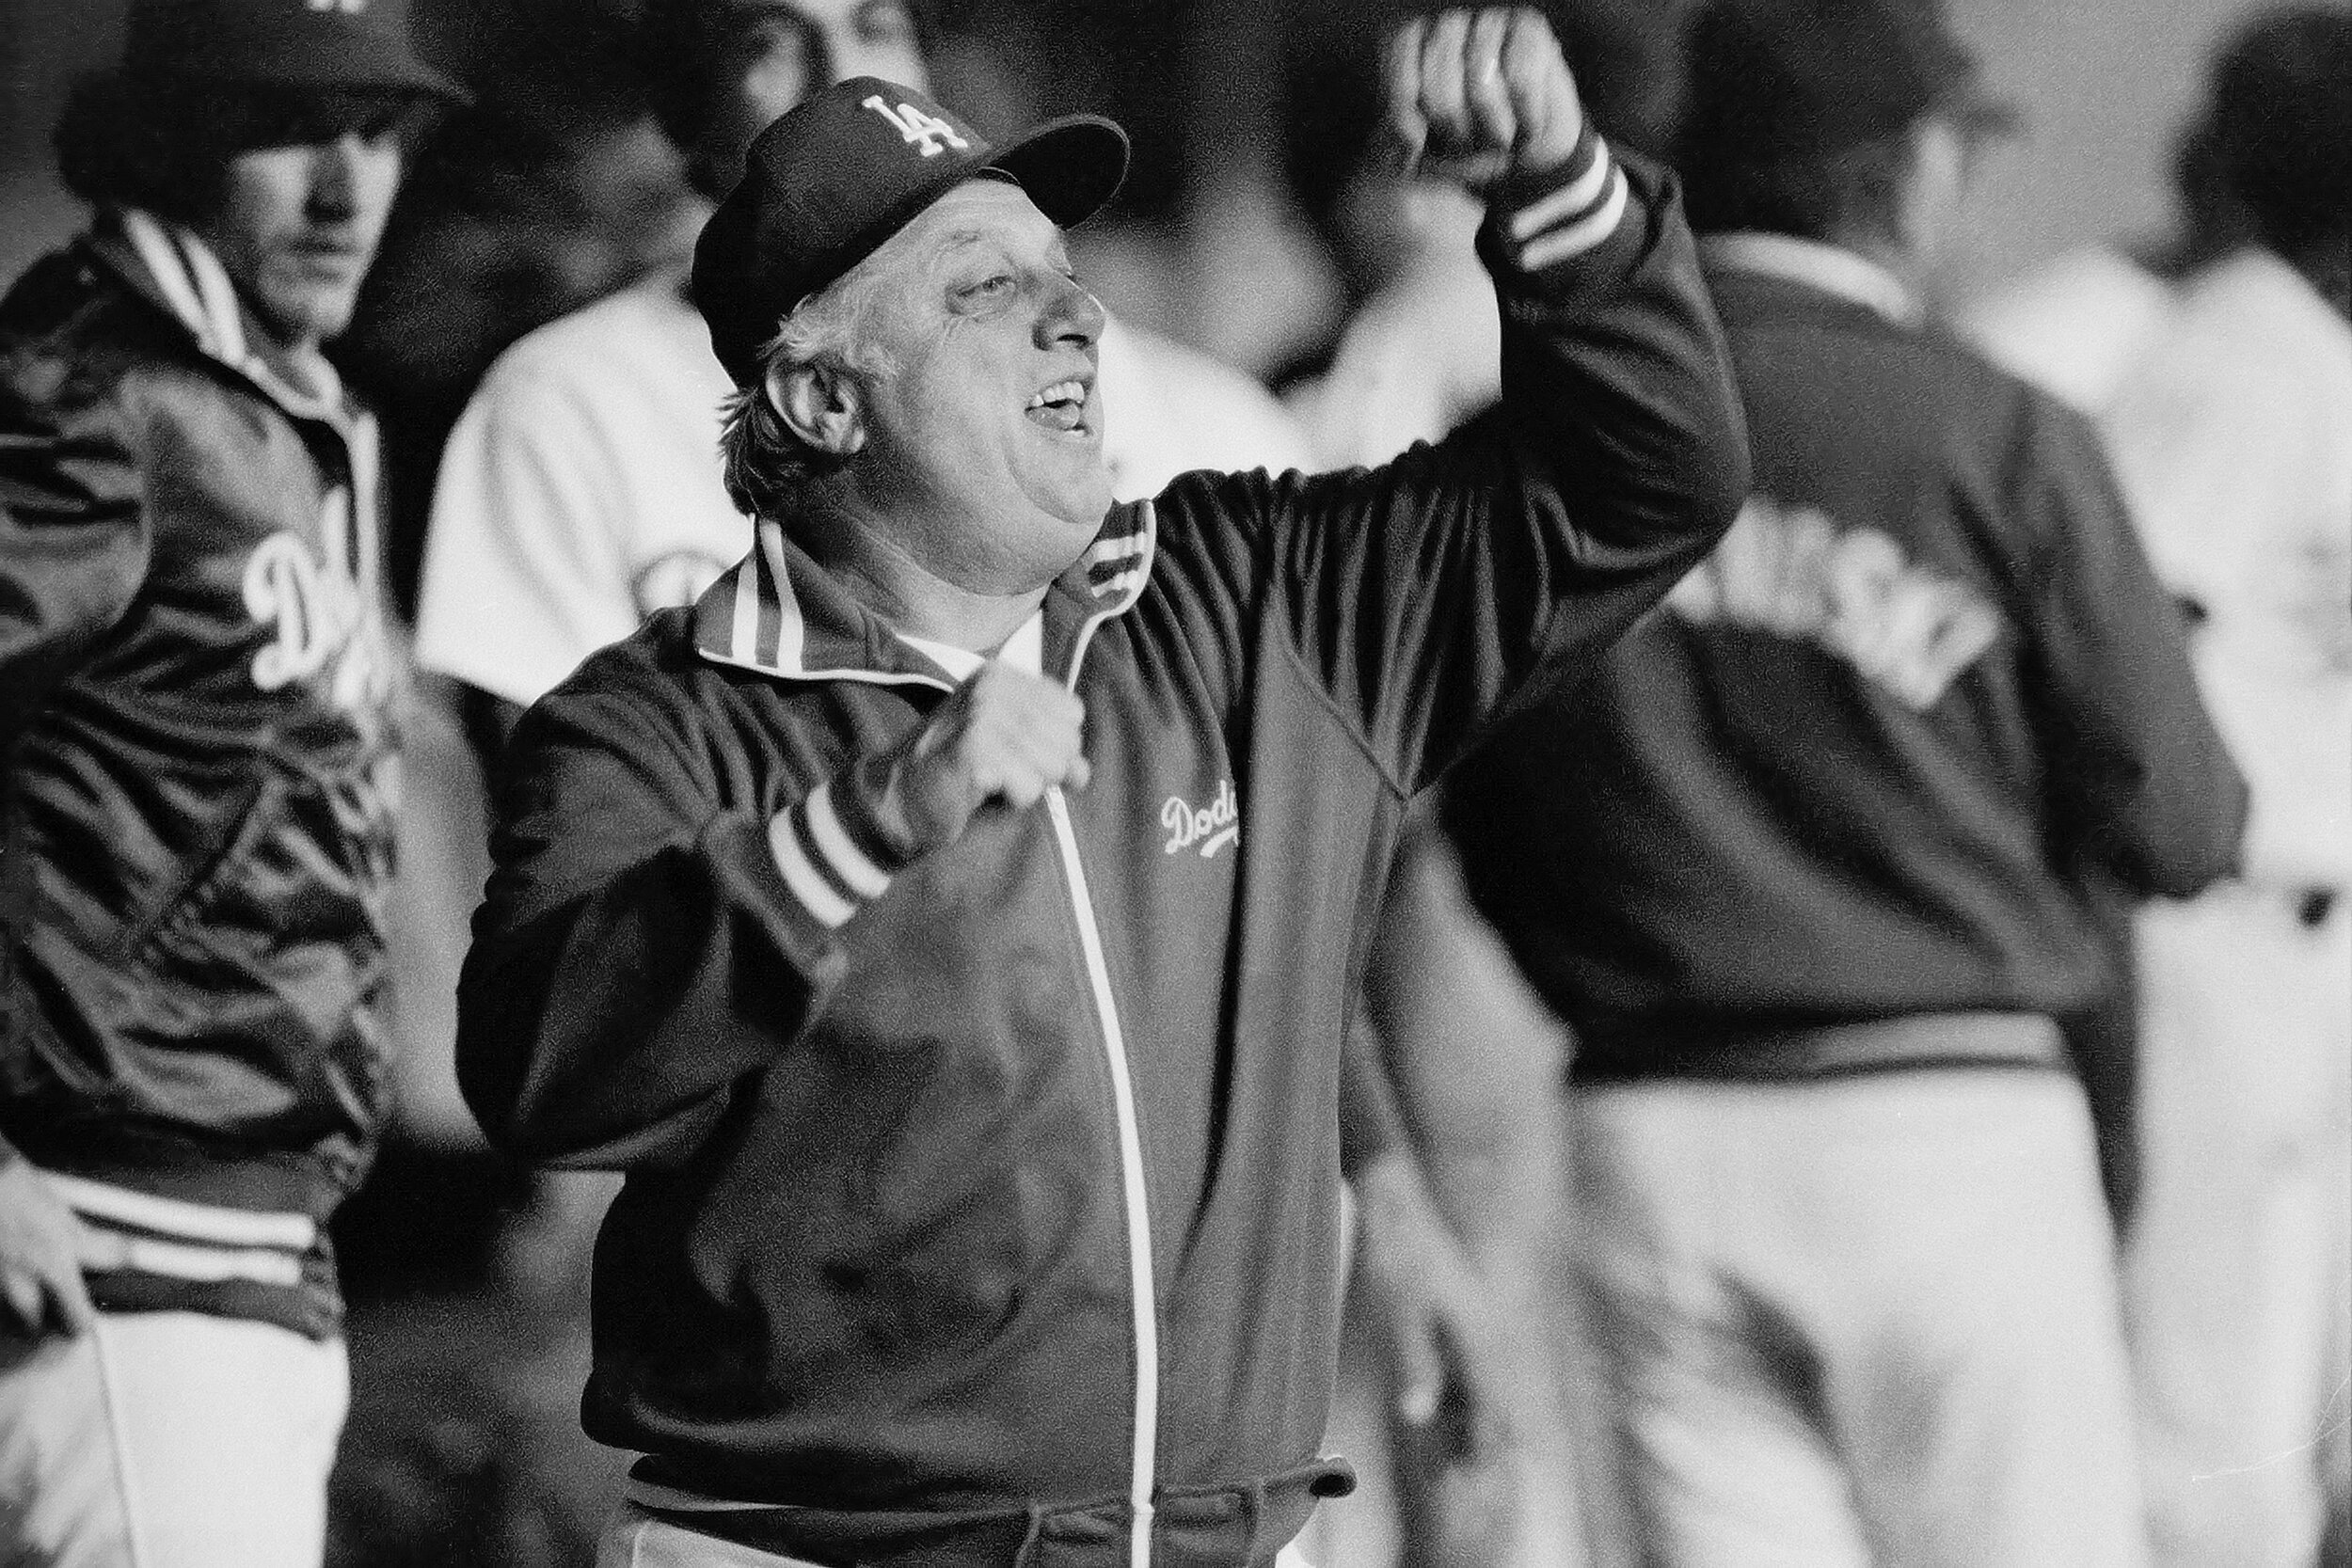  LOS ANGELES, CA - April 26, 1981:  Tommy Lasorda #2, manager of the Los Angeles Dodgers, cheers in the dugout during a game against the San Diego Padres at Dodger Stadium, Los Angeles, California. (Photo by Jayne Kamin-Oncea/Getty Images) 